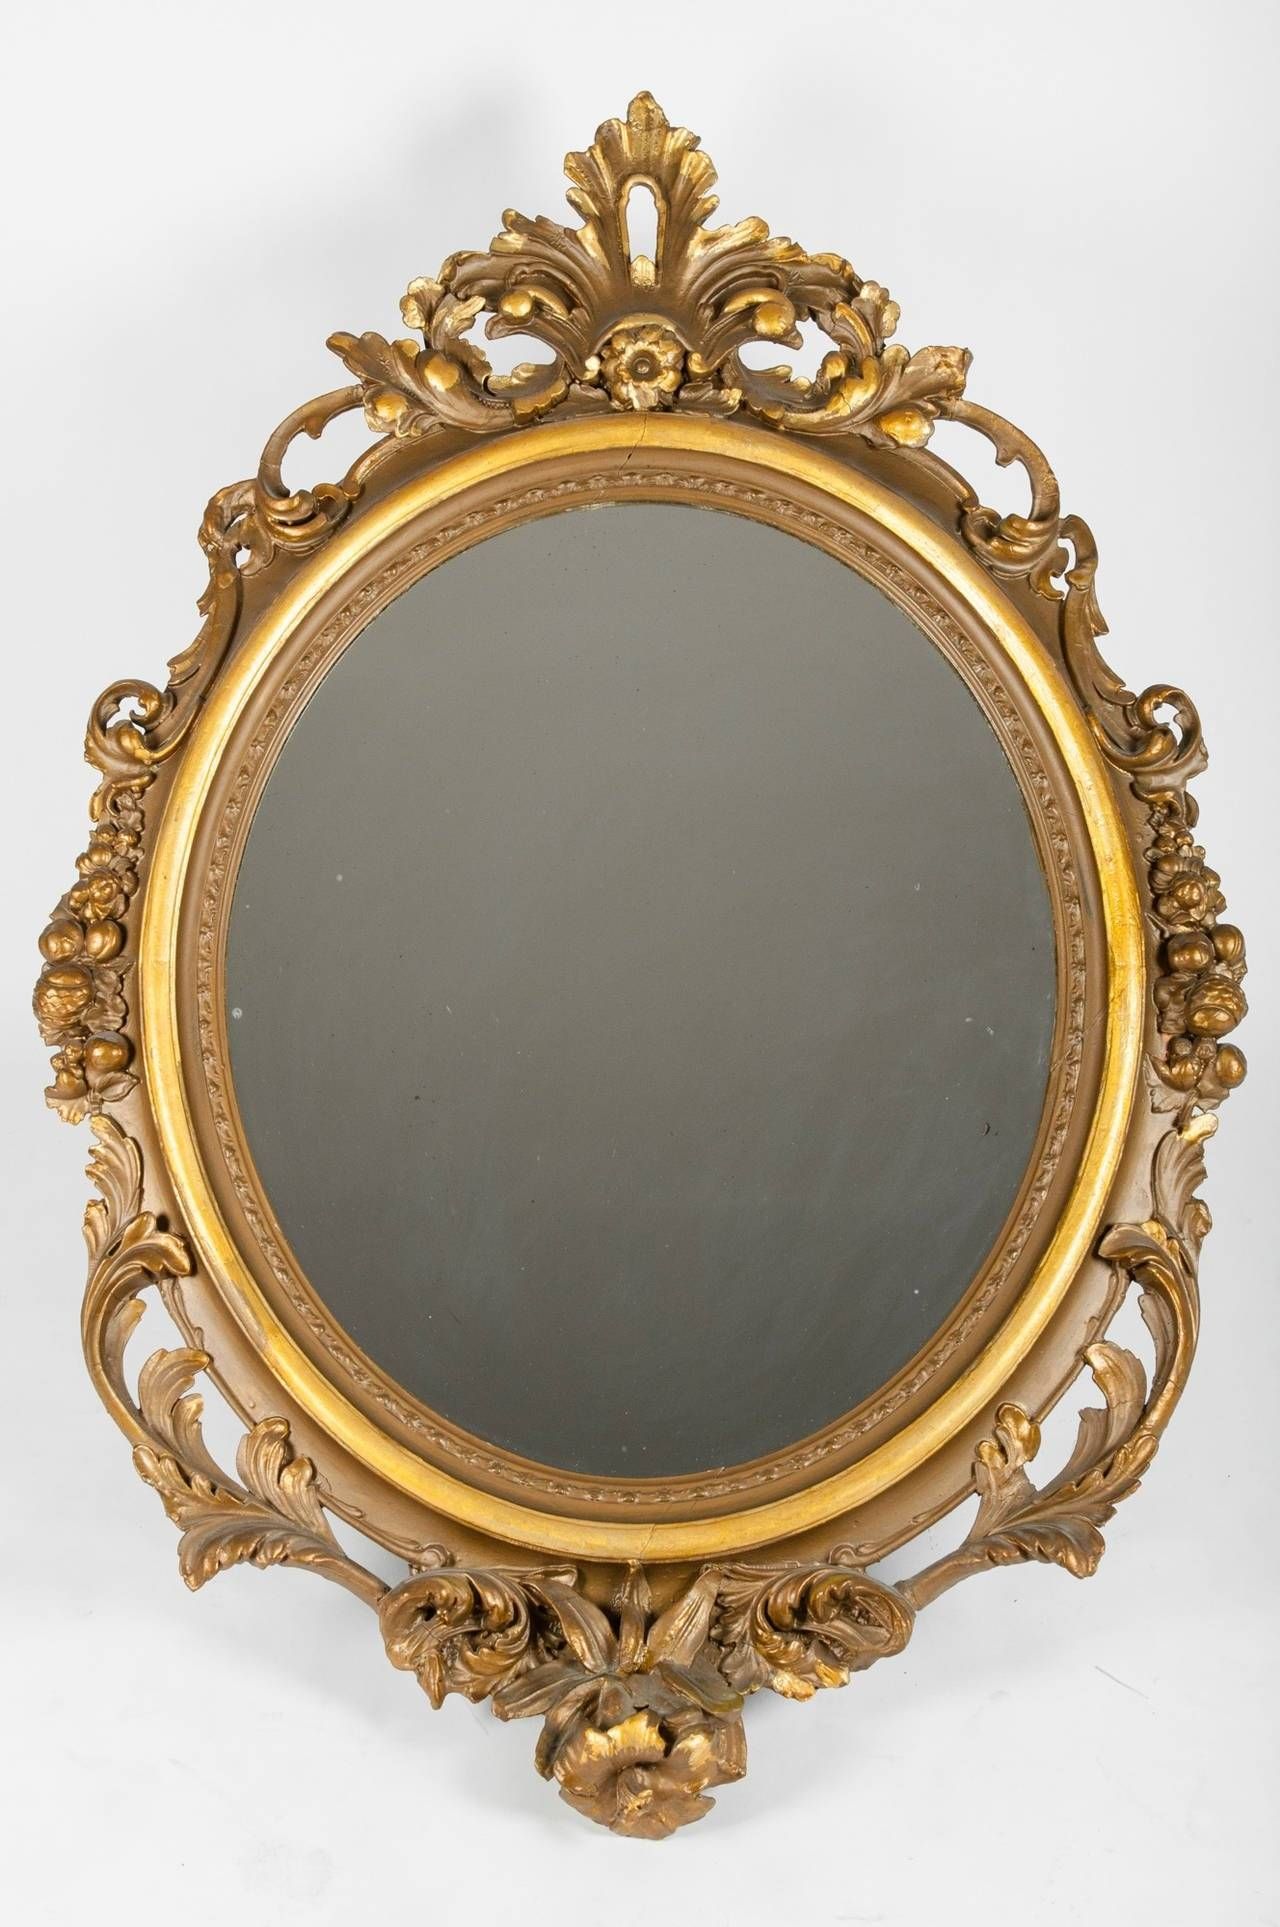 Large Gold Gilt Gesso Mirror For Sale At 1stdibs Within Gold Gilt Mirrors (View 11 of 15)